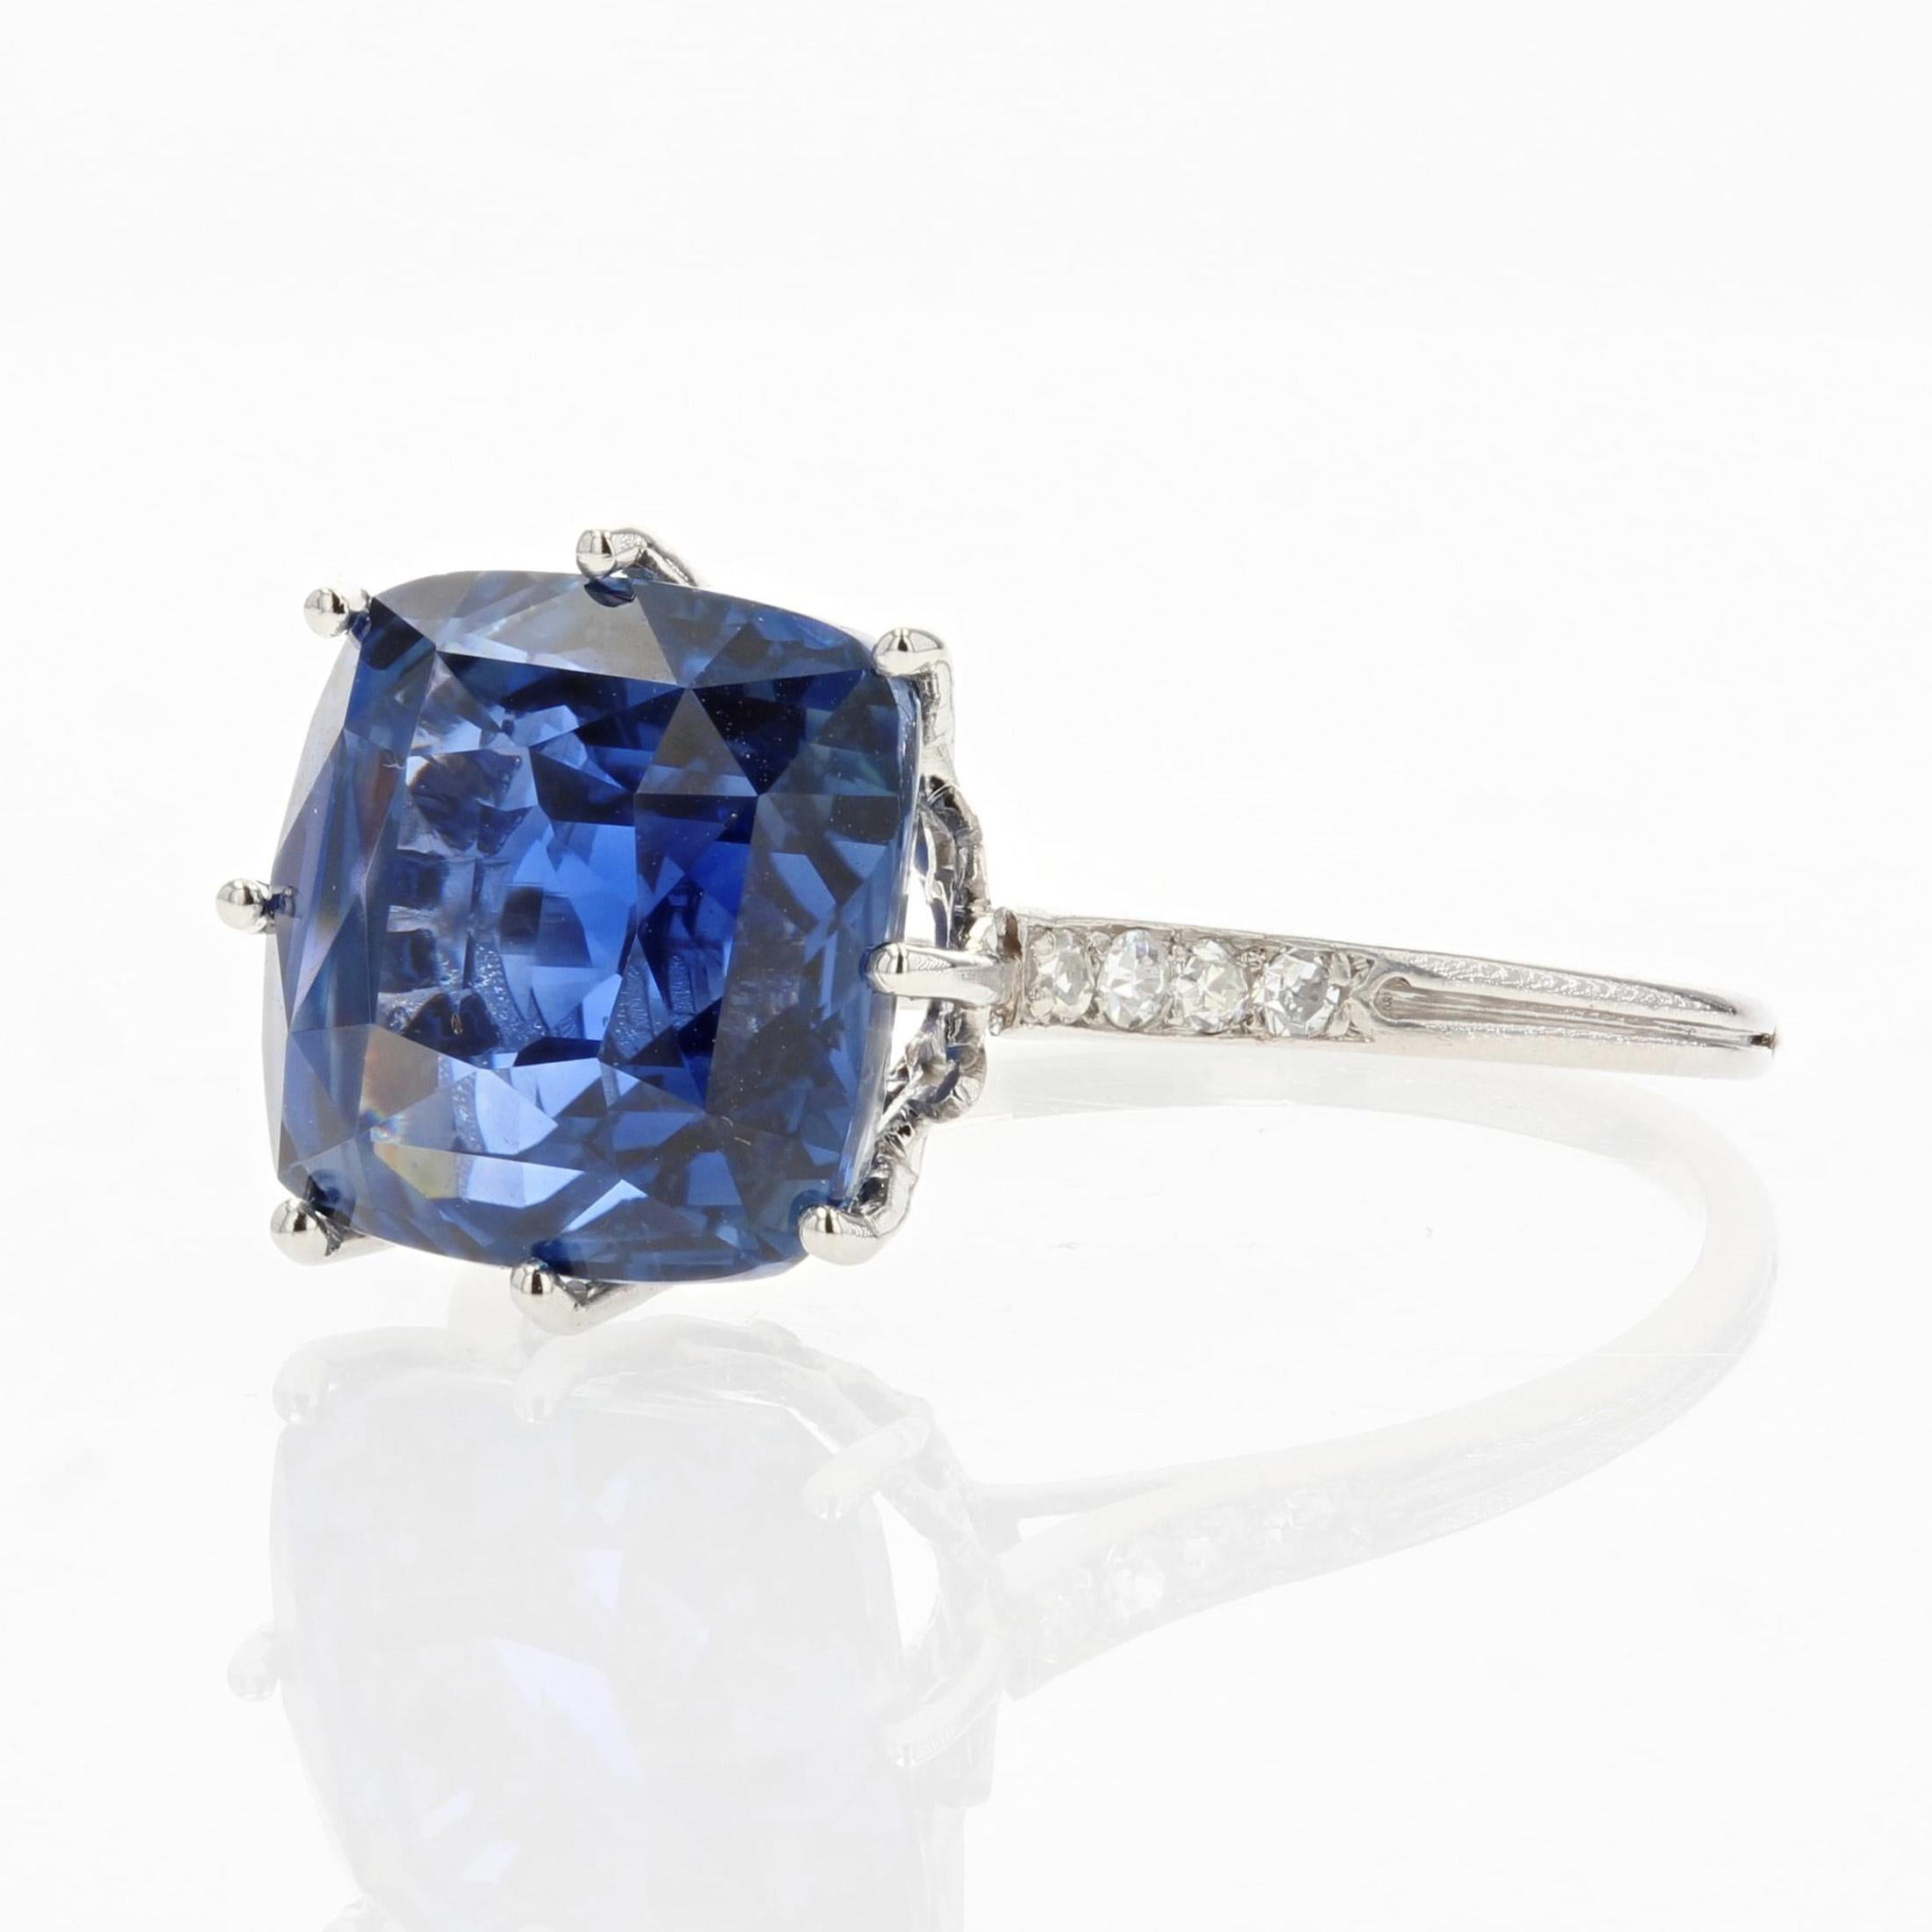 Cushion Cut French 1930s Art Deco Natural Cornflower Certified Sapphire Diamonds Ring For Sale